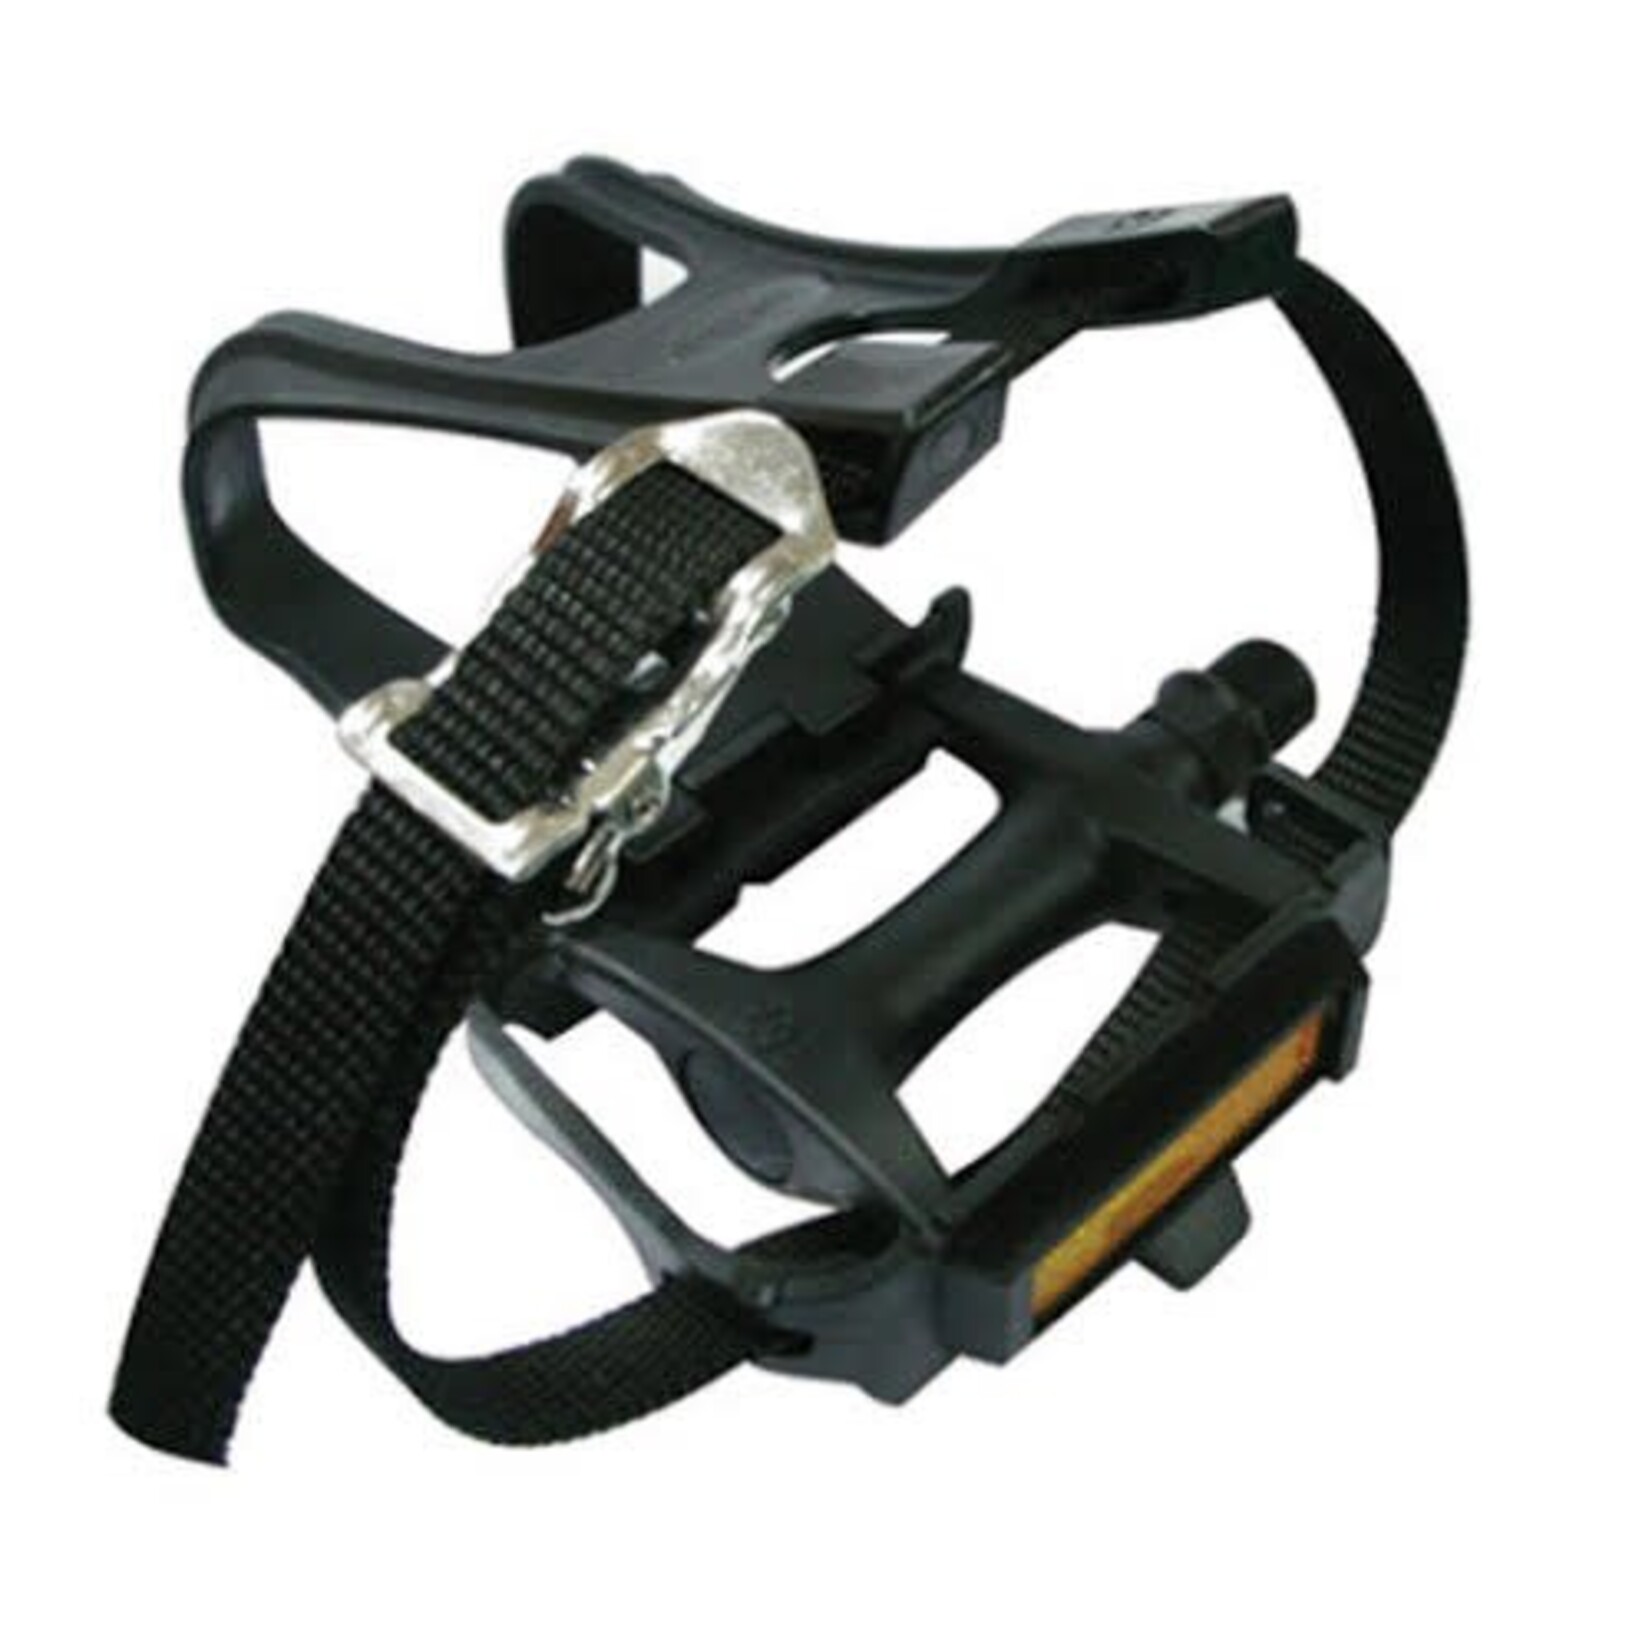 OEM Road/MTB Pedals with Toe Clips/Straps